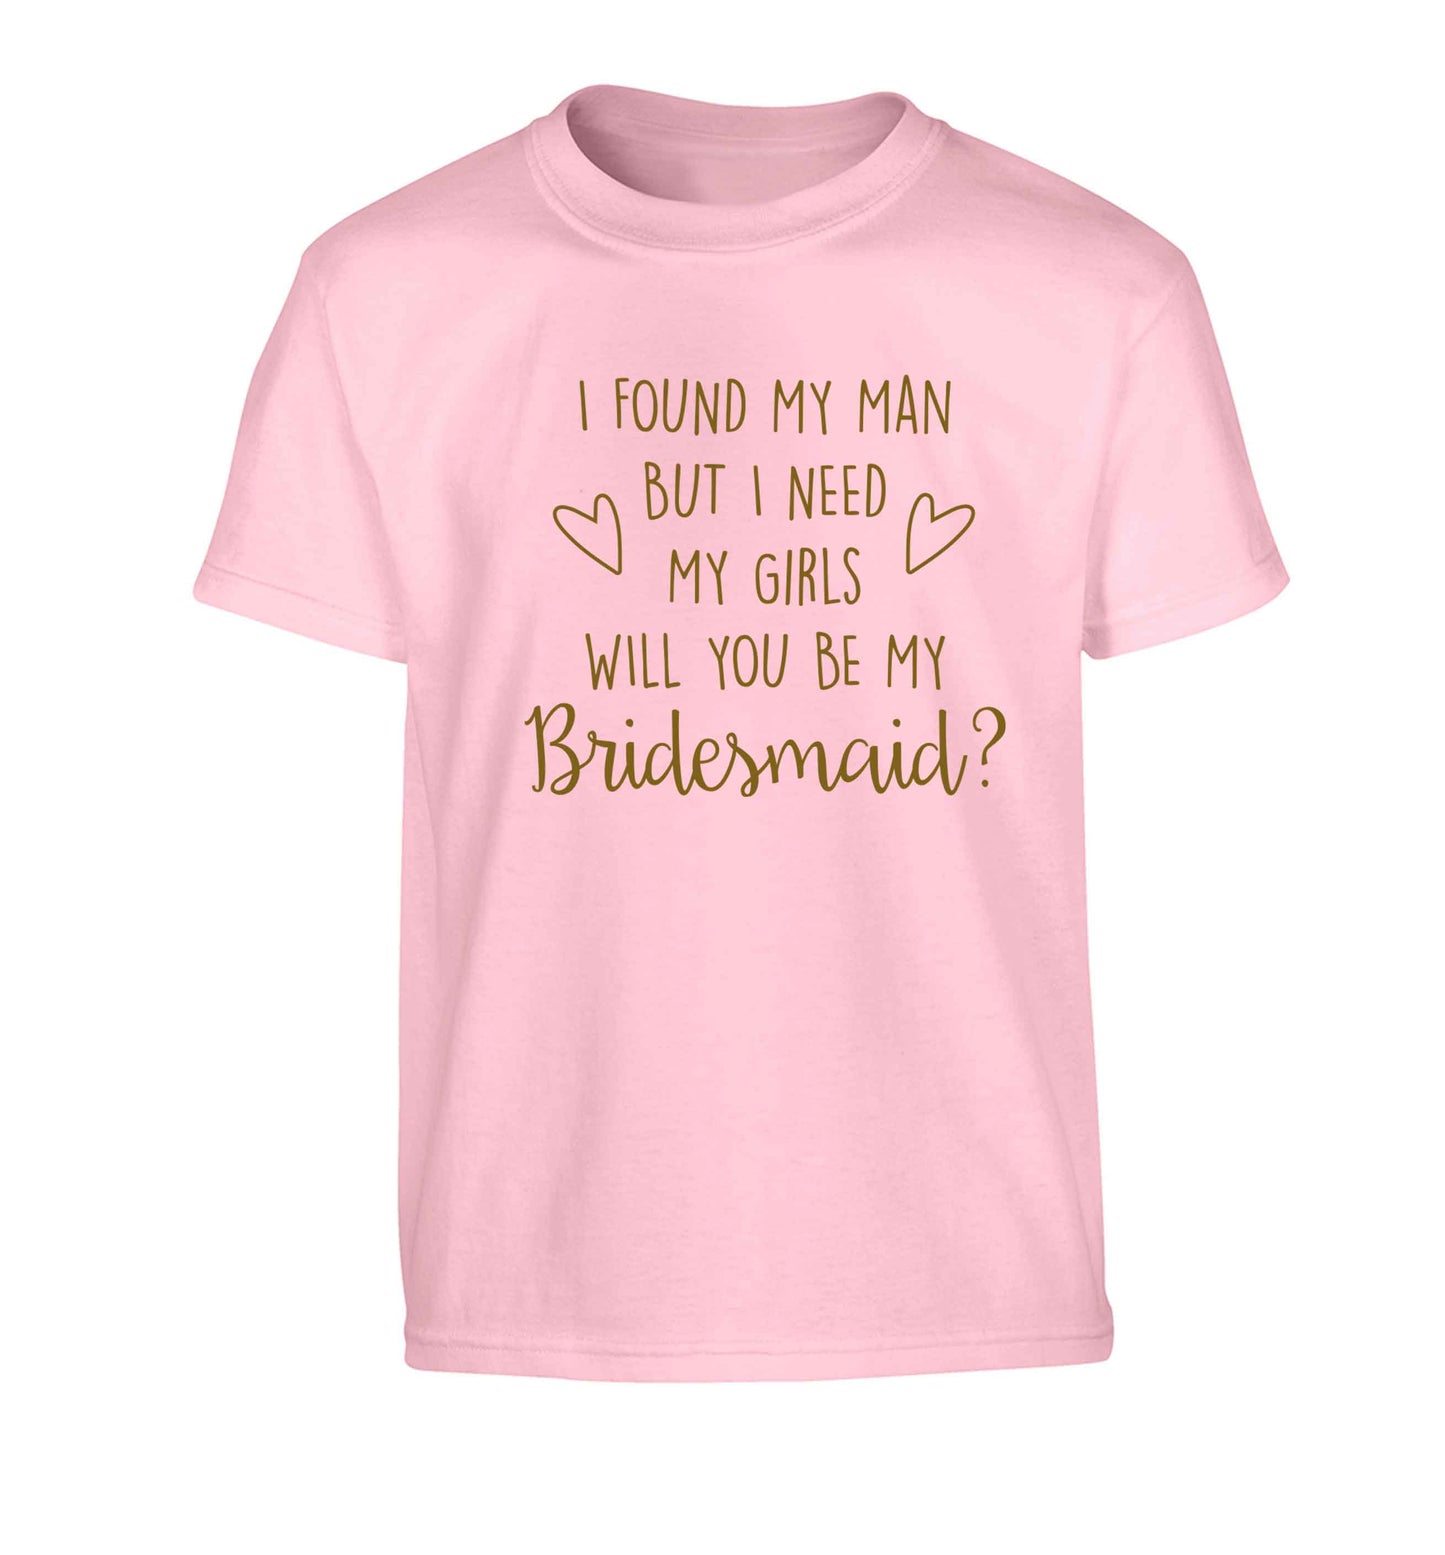 I found my man but I need my girls will you be my bridesmaid? Children's light pink Tshirt 12-13 Years